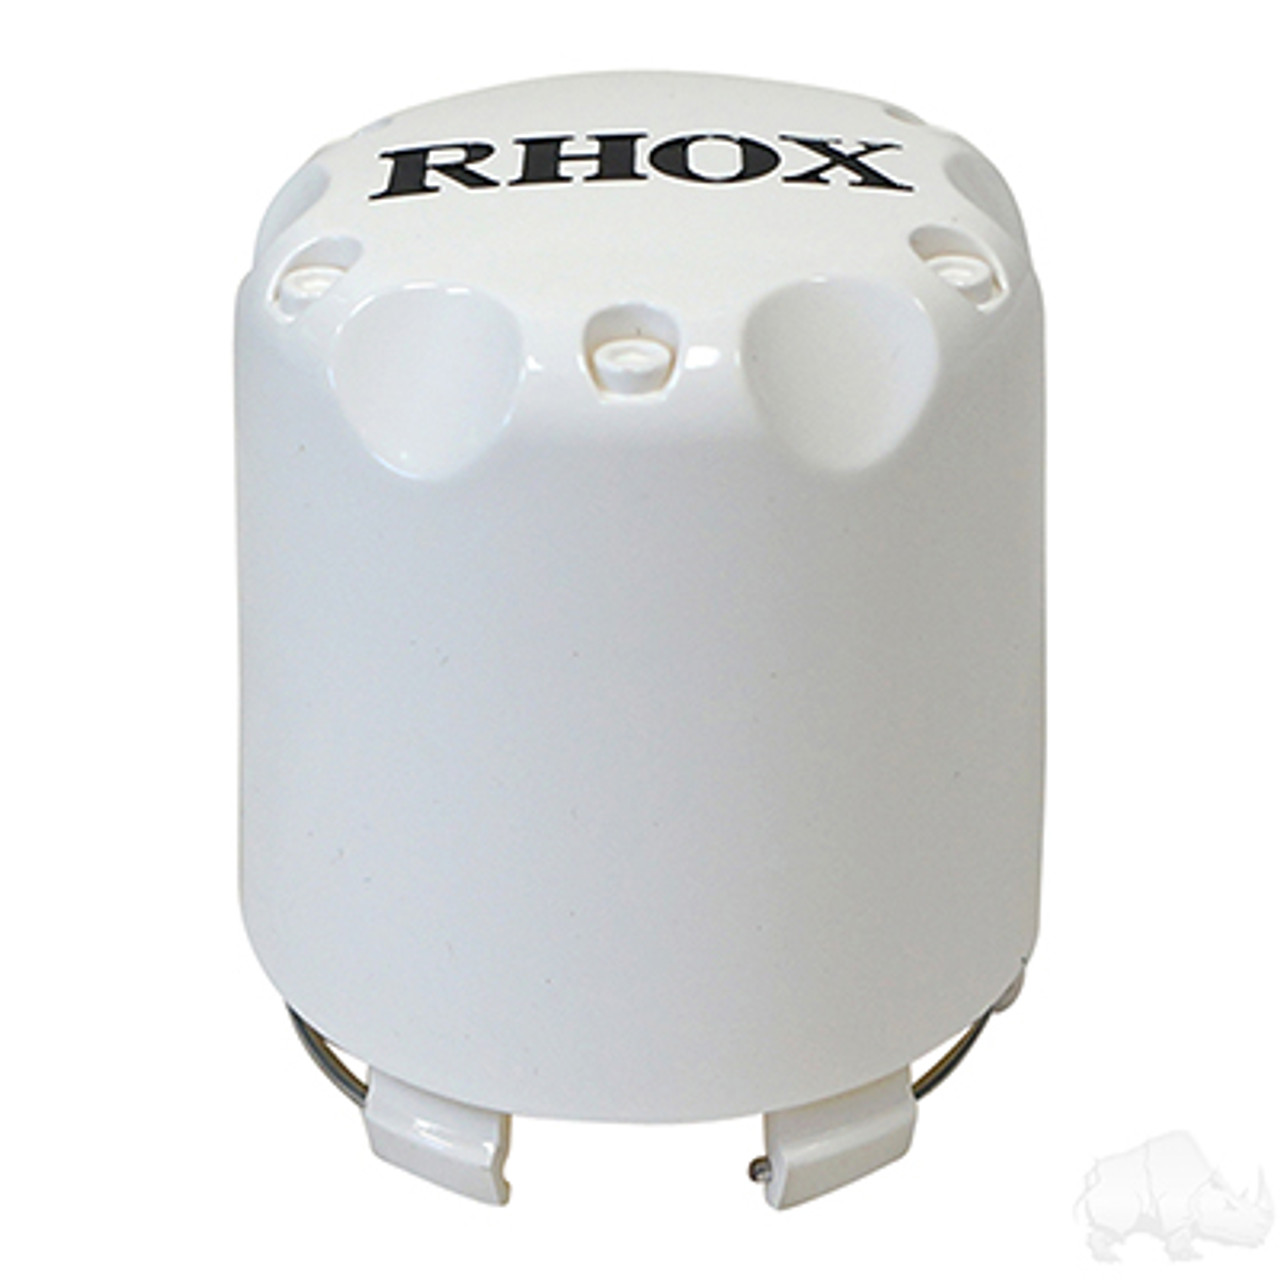 RHOX Snap-In Center Cap, White with Black-Set of 4, TIR-RX001-WBx4-D1